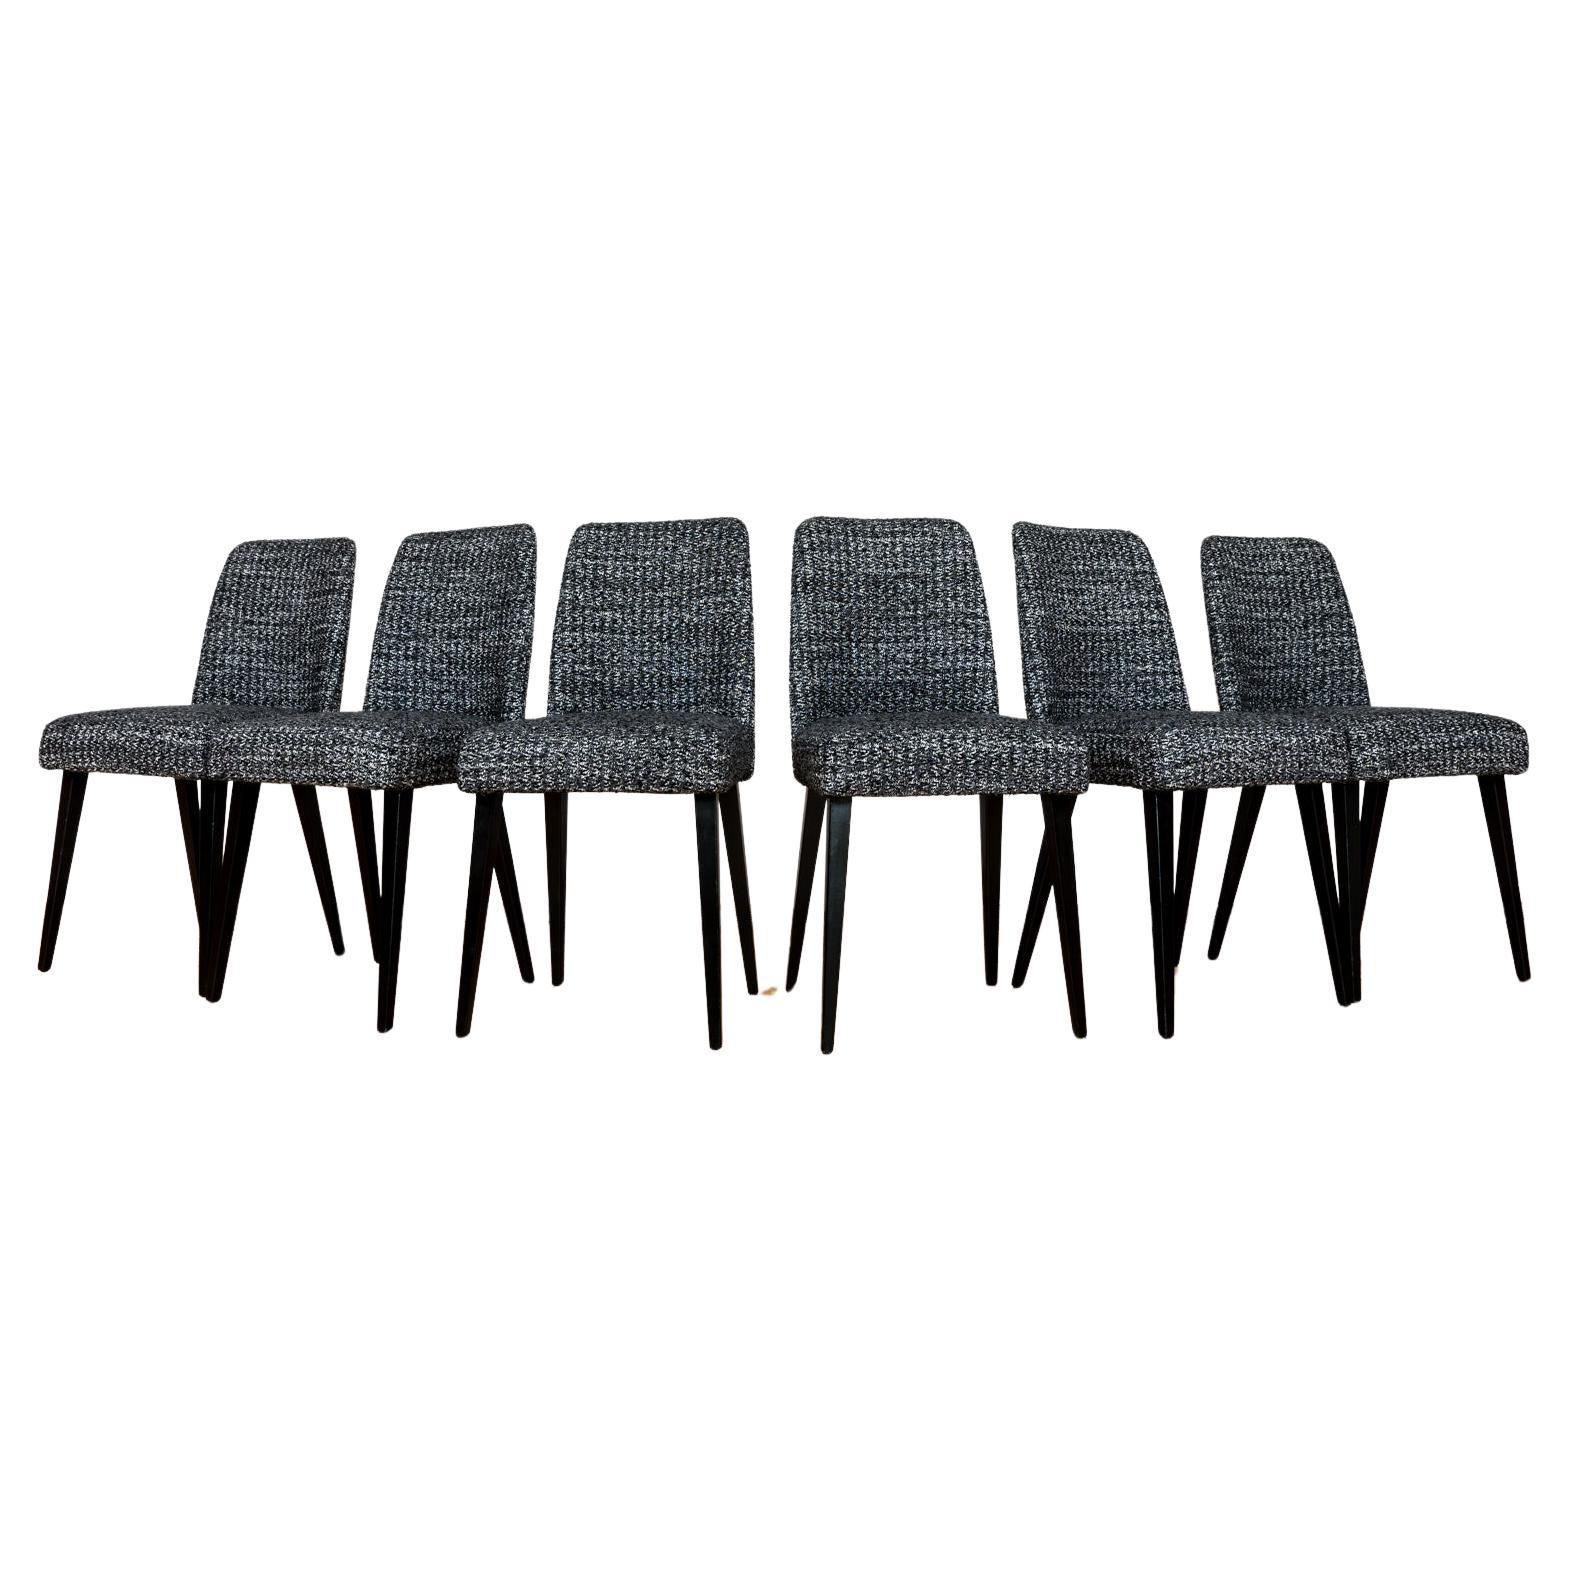 Set Of 6 Black Chairs, 1960s, Poland For Sale